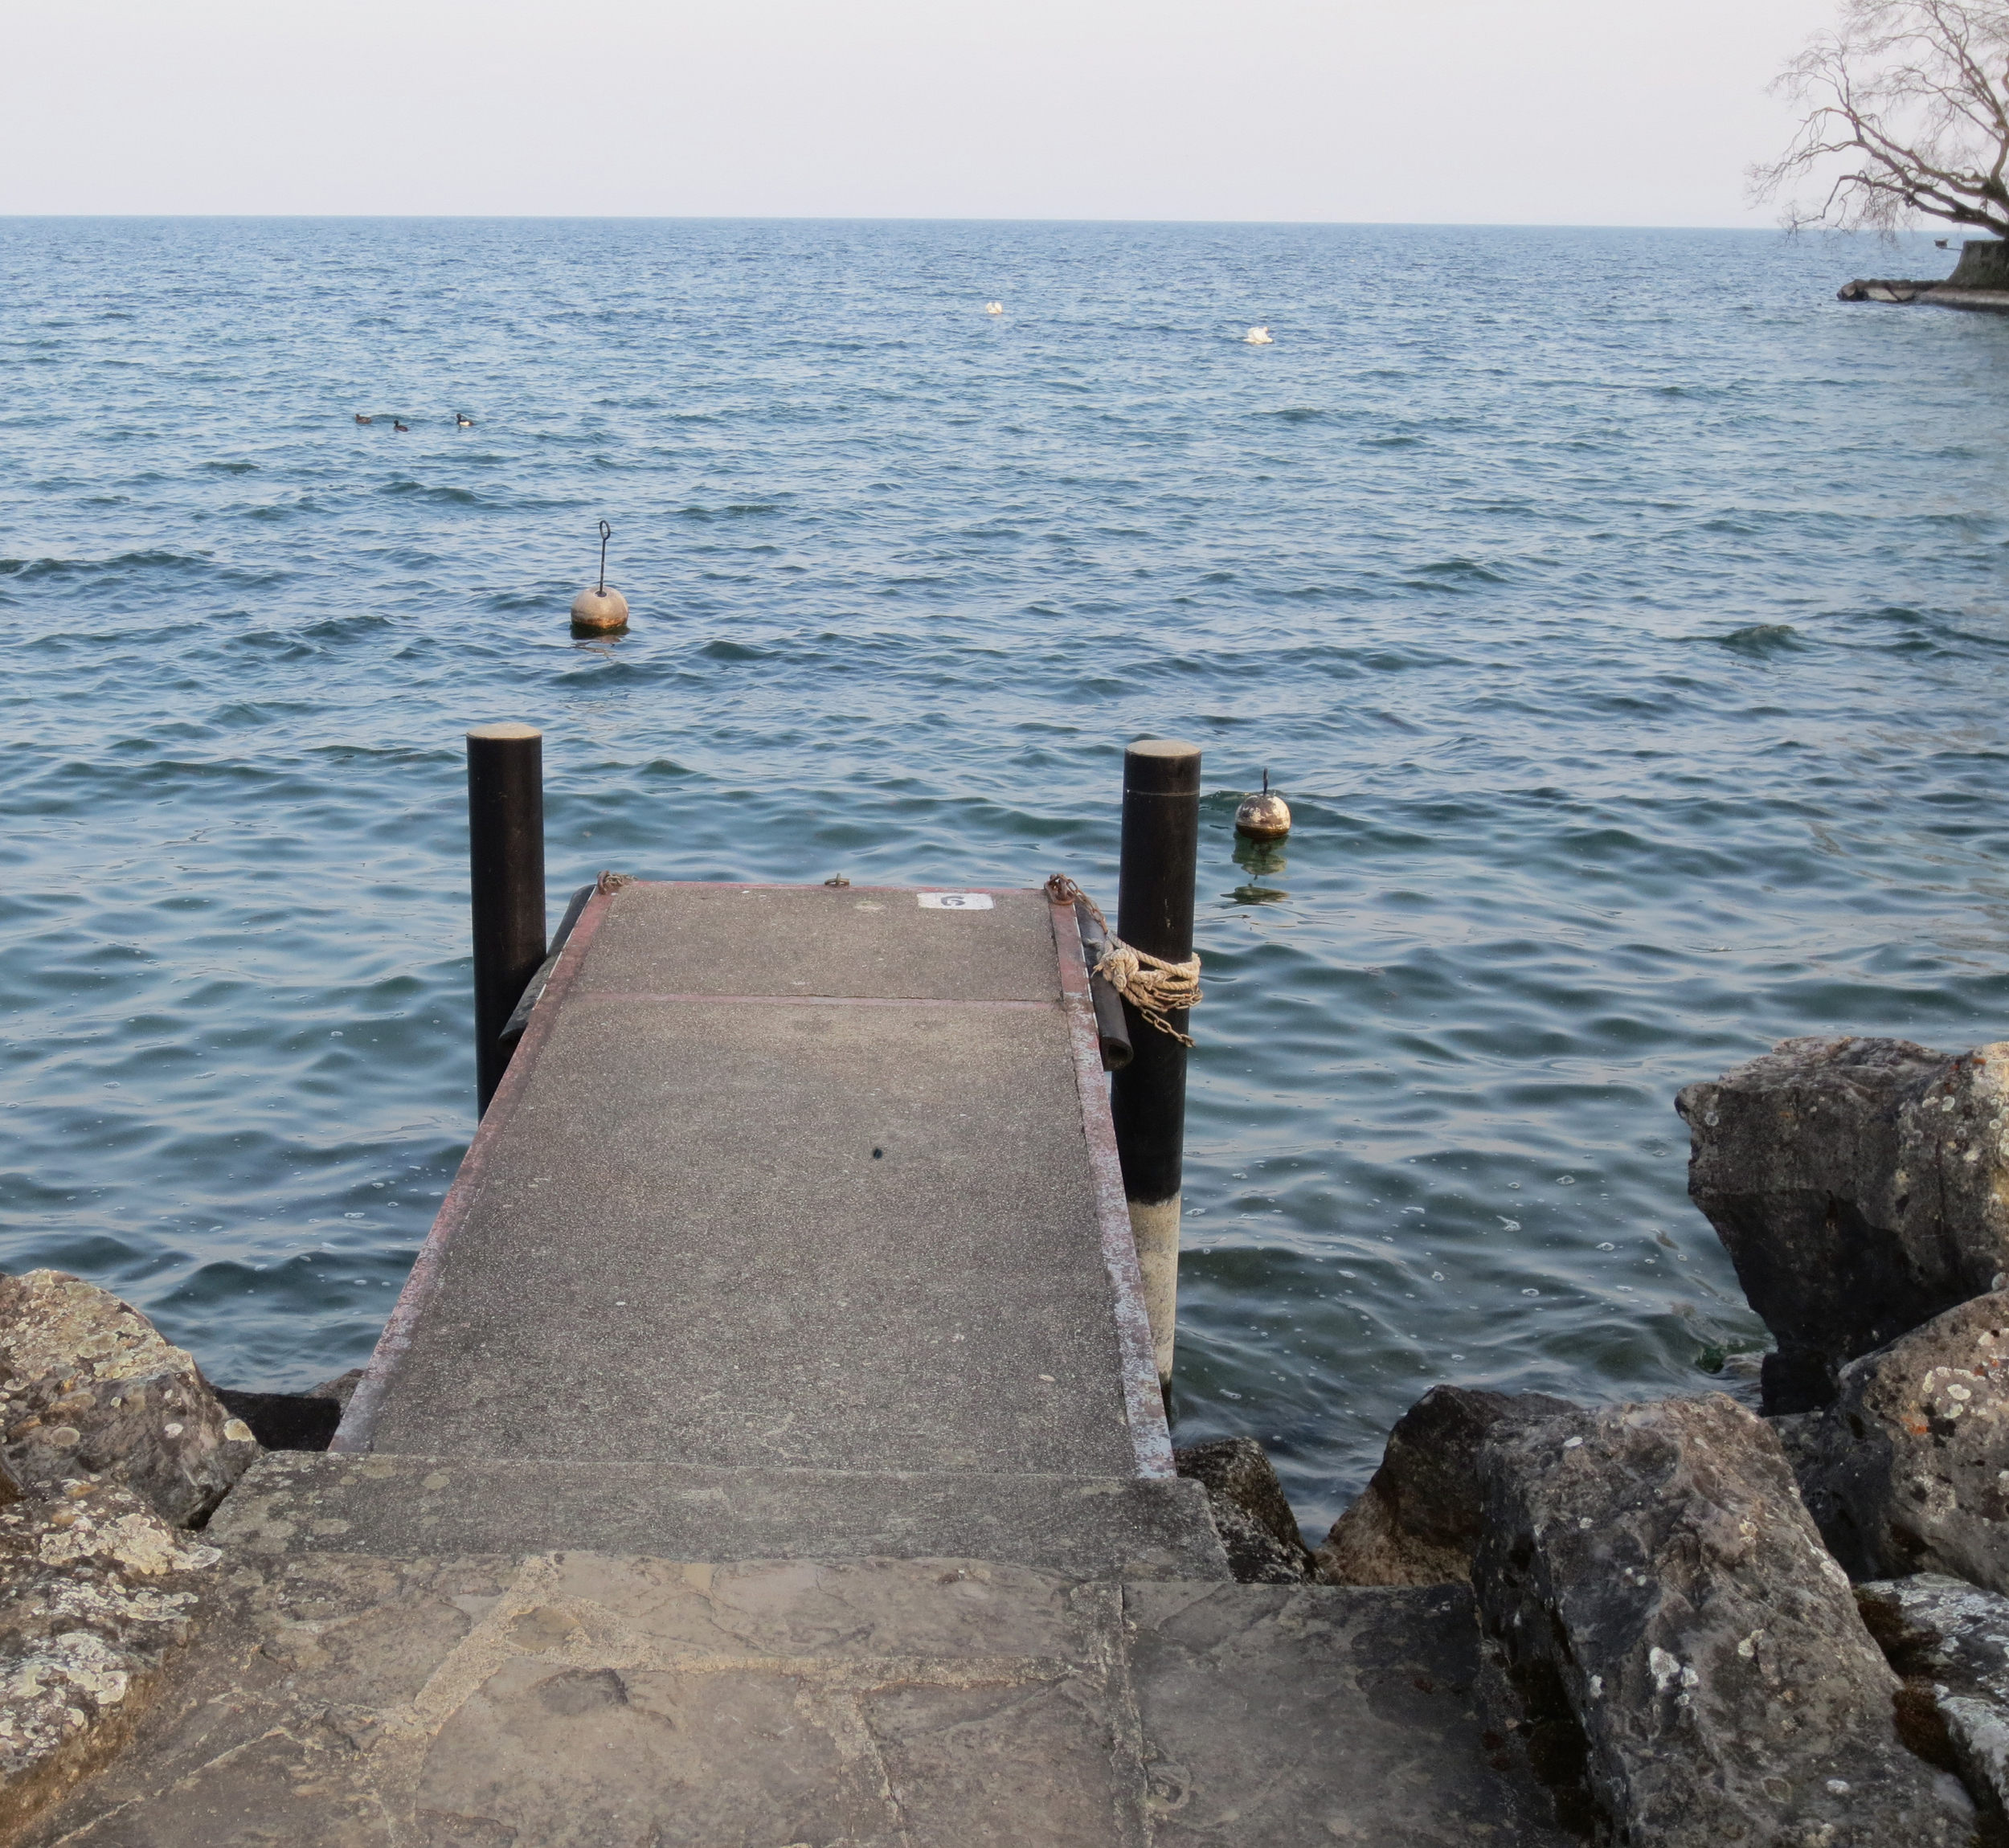   A dock stretches out onto the shore of Lake Geneva in the village of Rolle, Switzerland. June, 2012.  